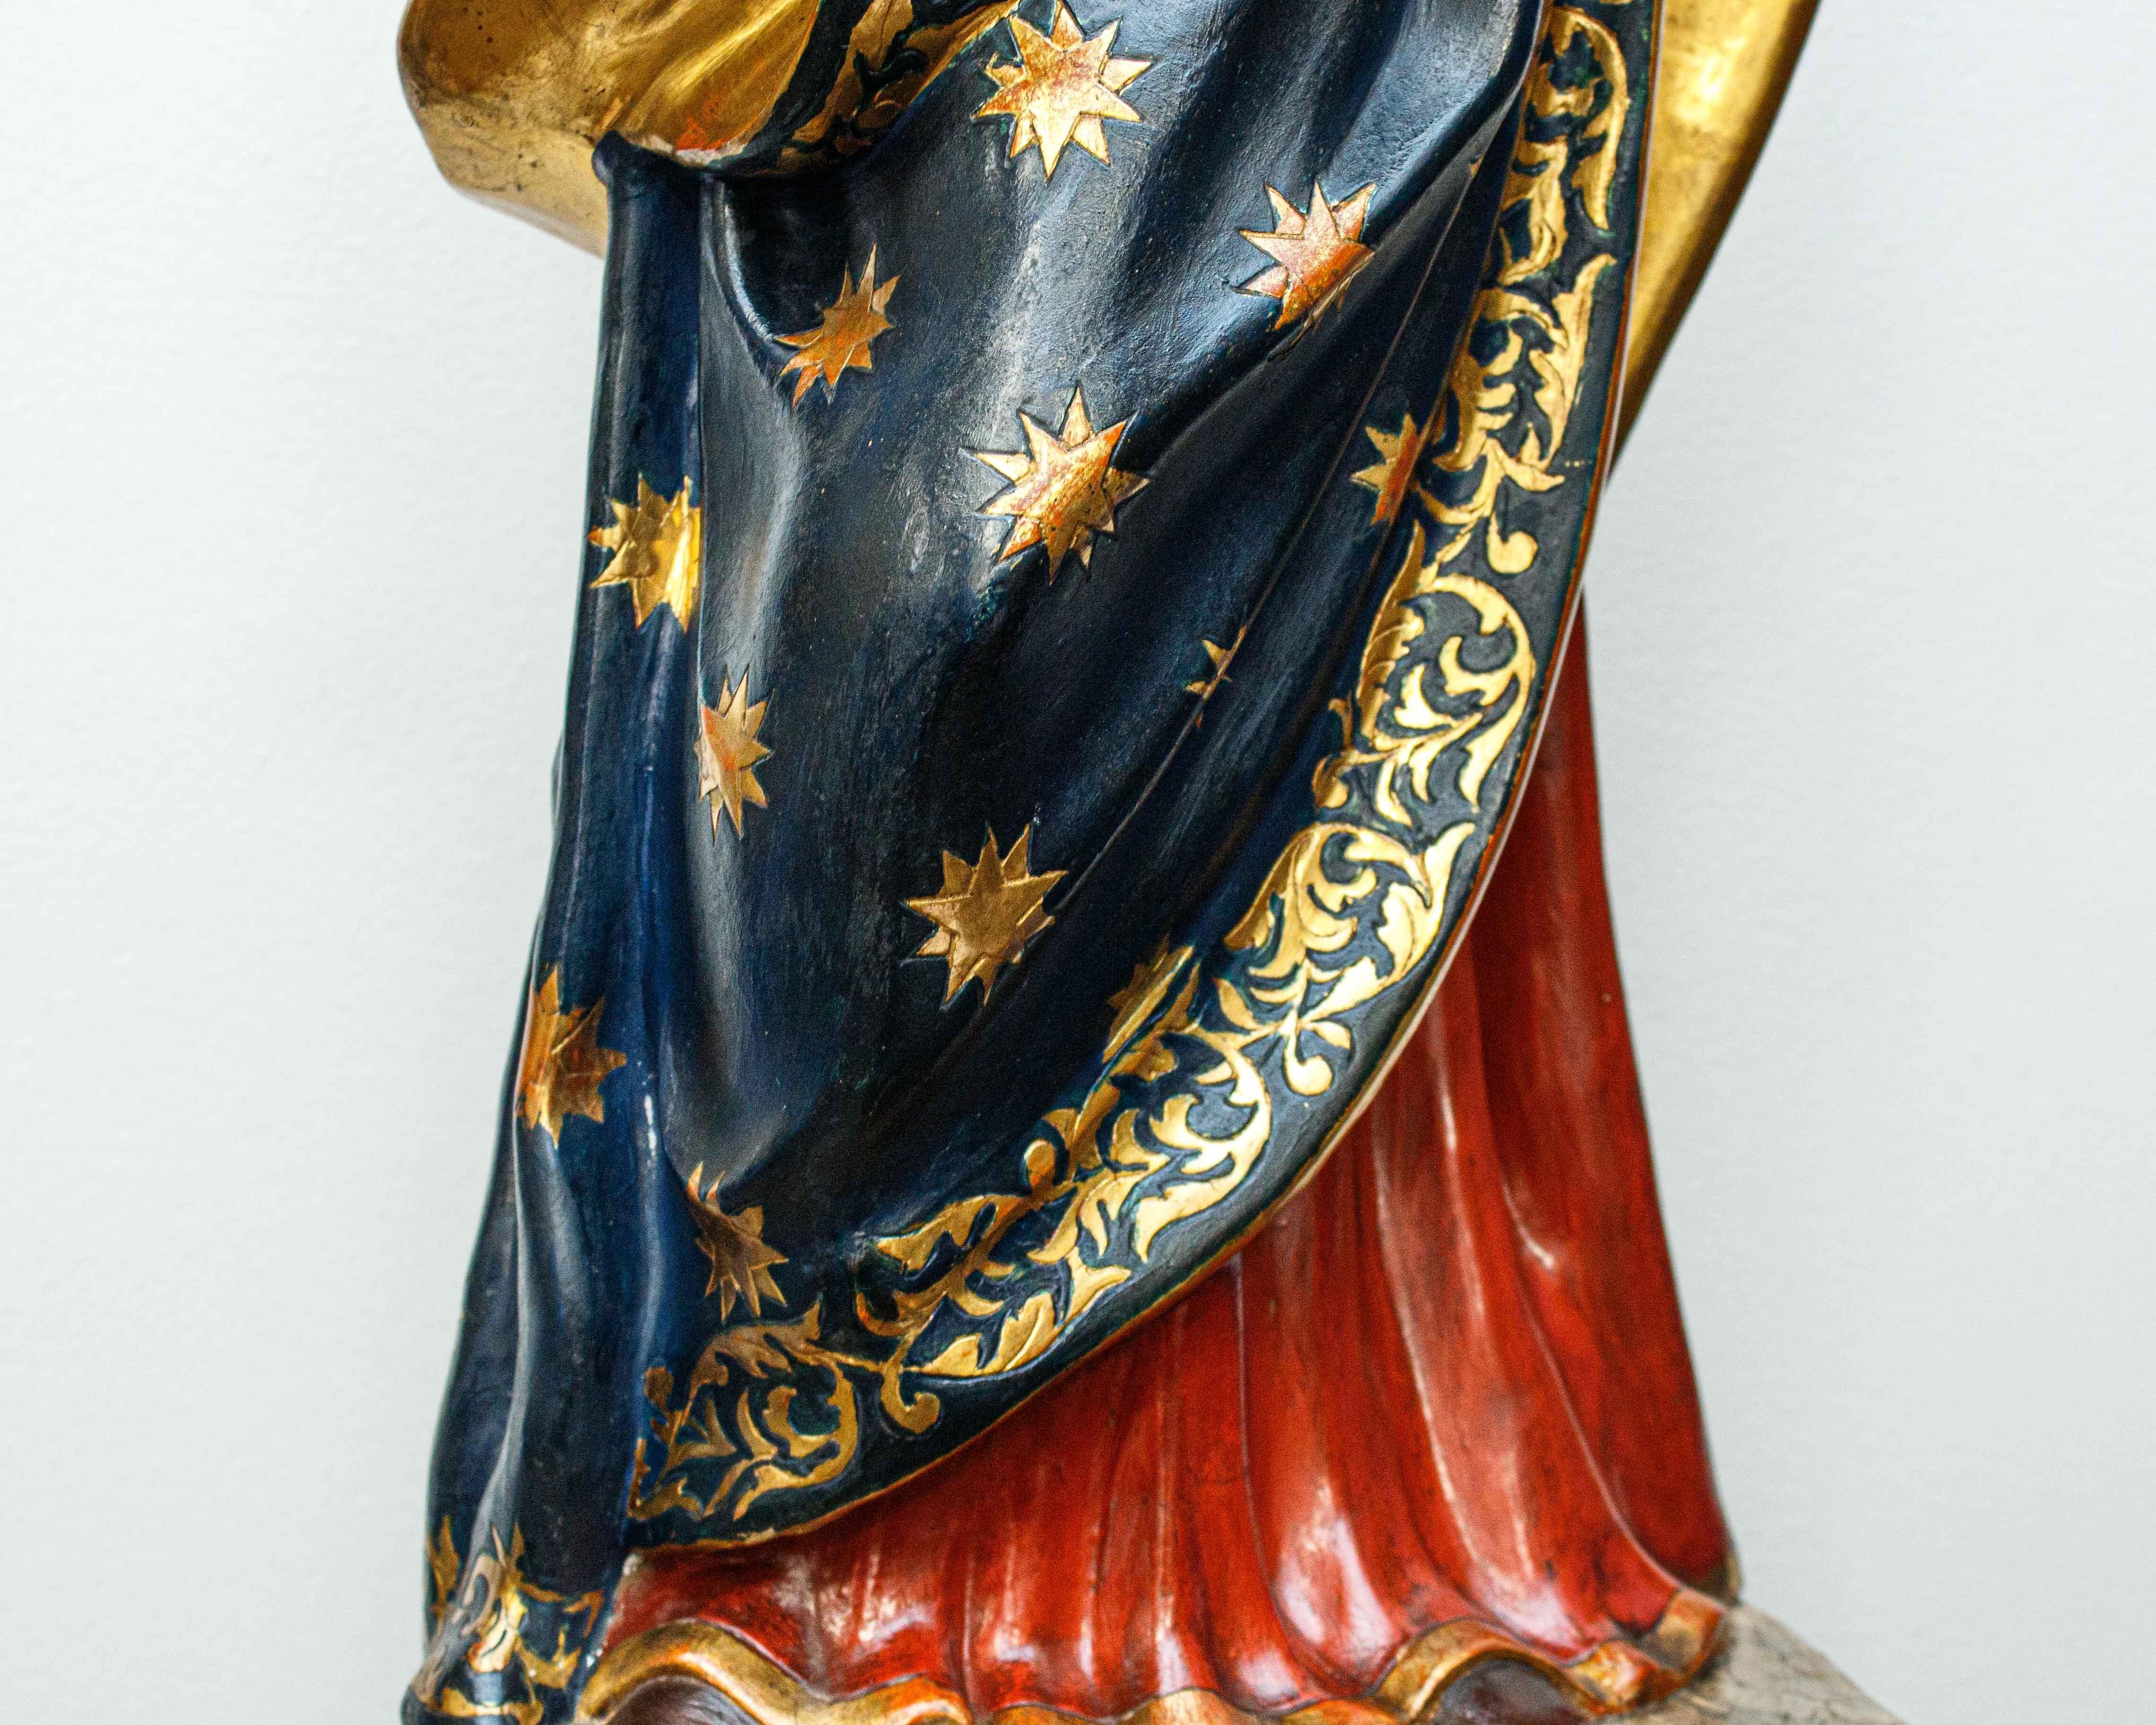 Paper 19th Century Madonna and Child with Souls in Purgatory Papier-Mache Sculpture For Sale